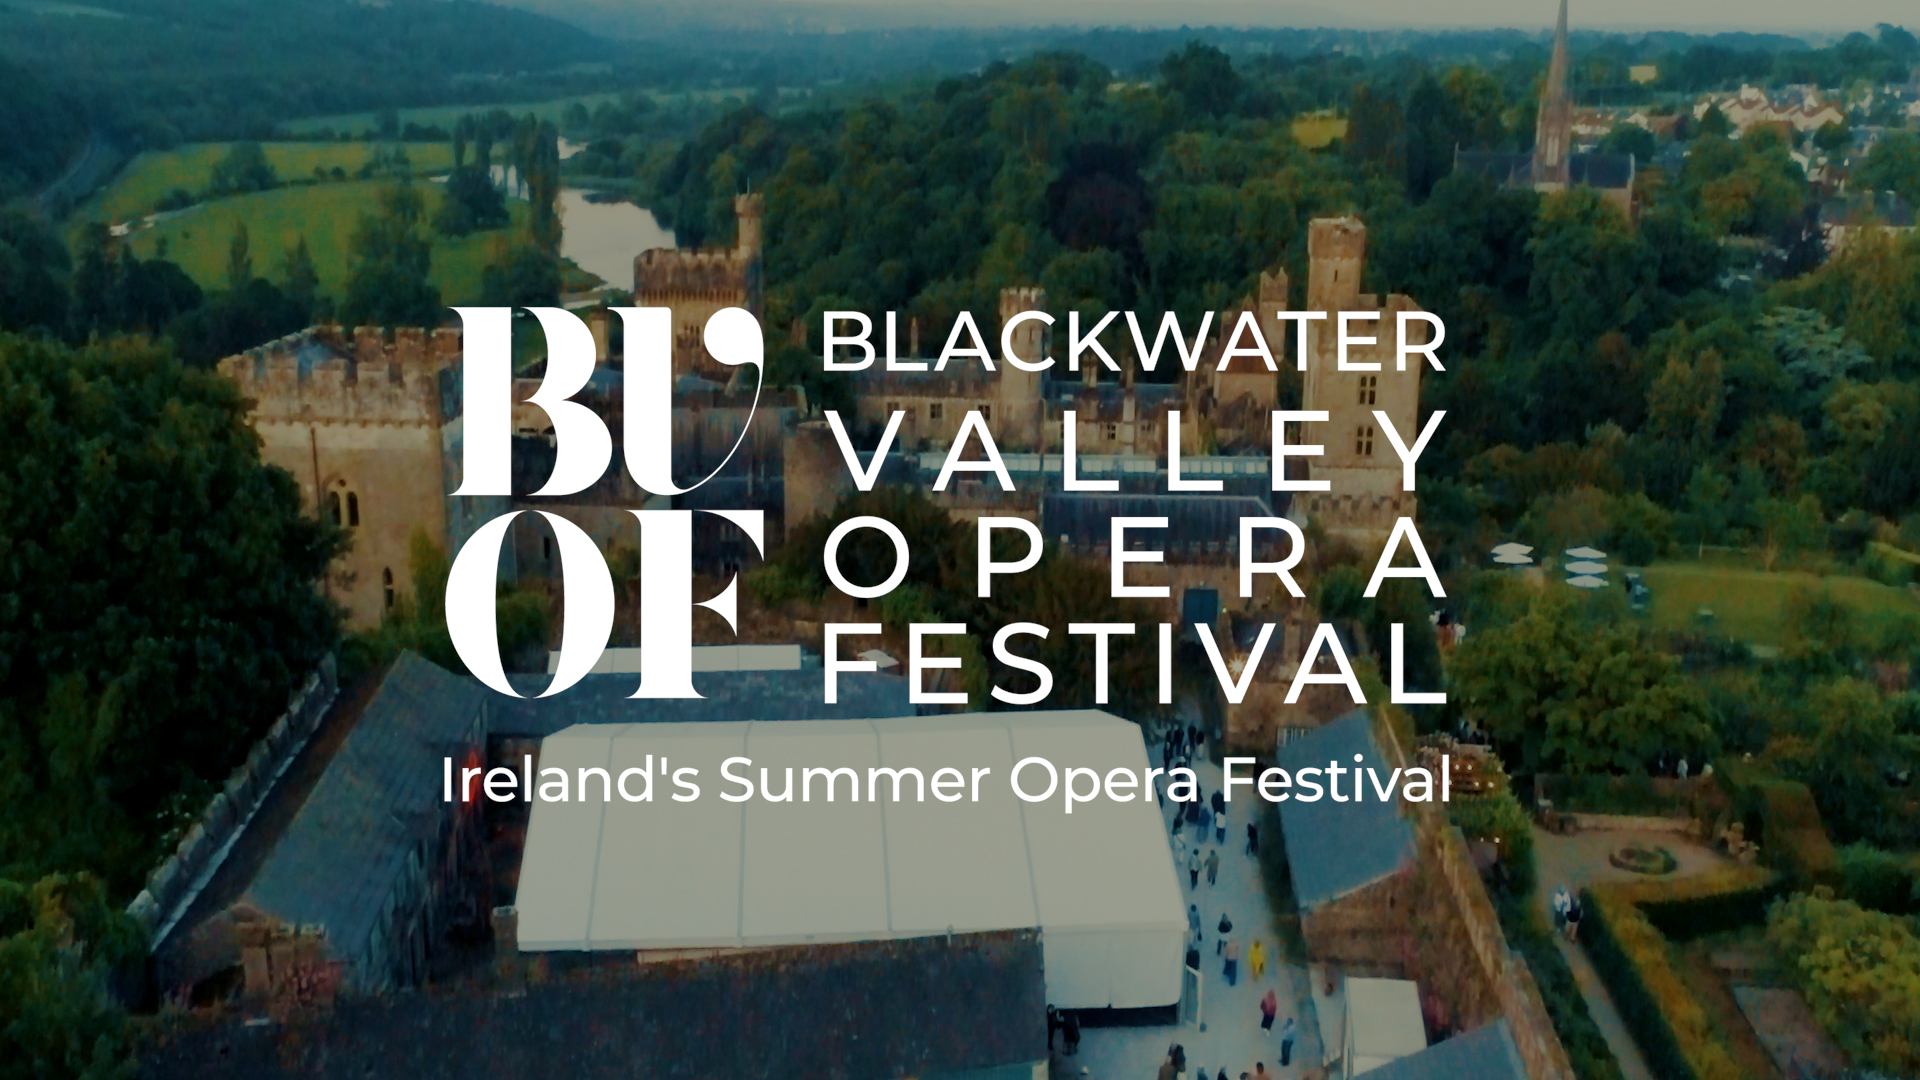 ​Ireland’s Summer Opera Festival returns from 27 May - 3 June 2024 with opera, concerts, recitals, education programmes, free events, gourmet dining and more. Priority booking available online -secure your ticket in advance.